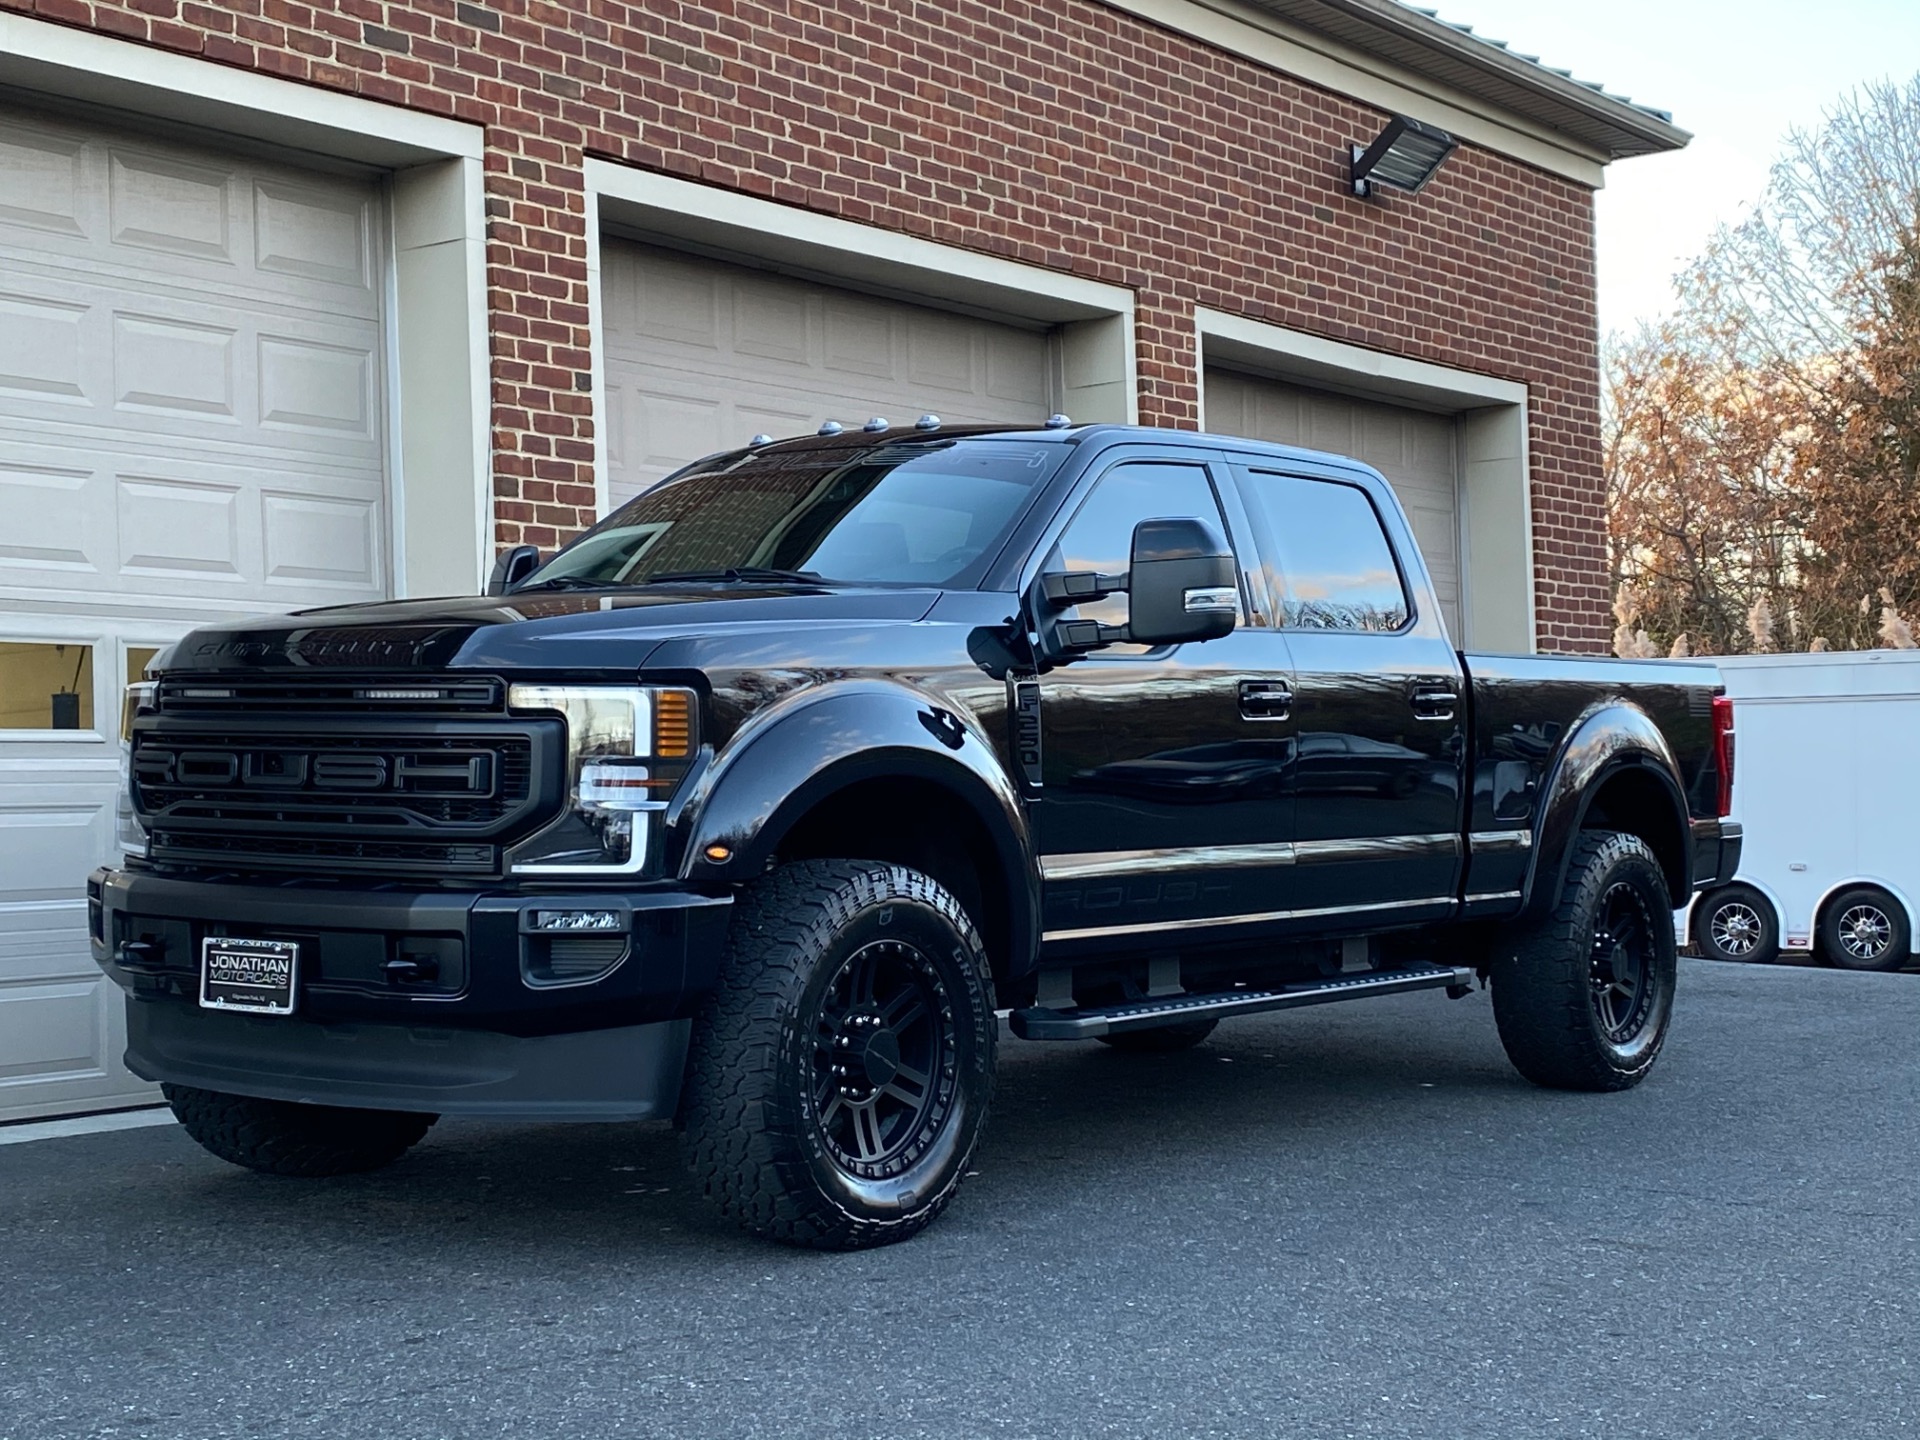 2020 Ford F-250 Super Duty Lariat Stock # D51441 for sale near